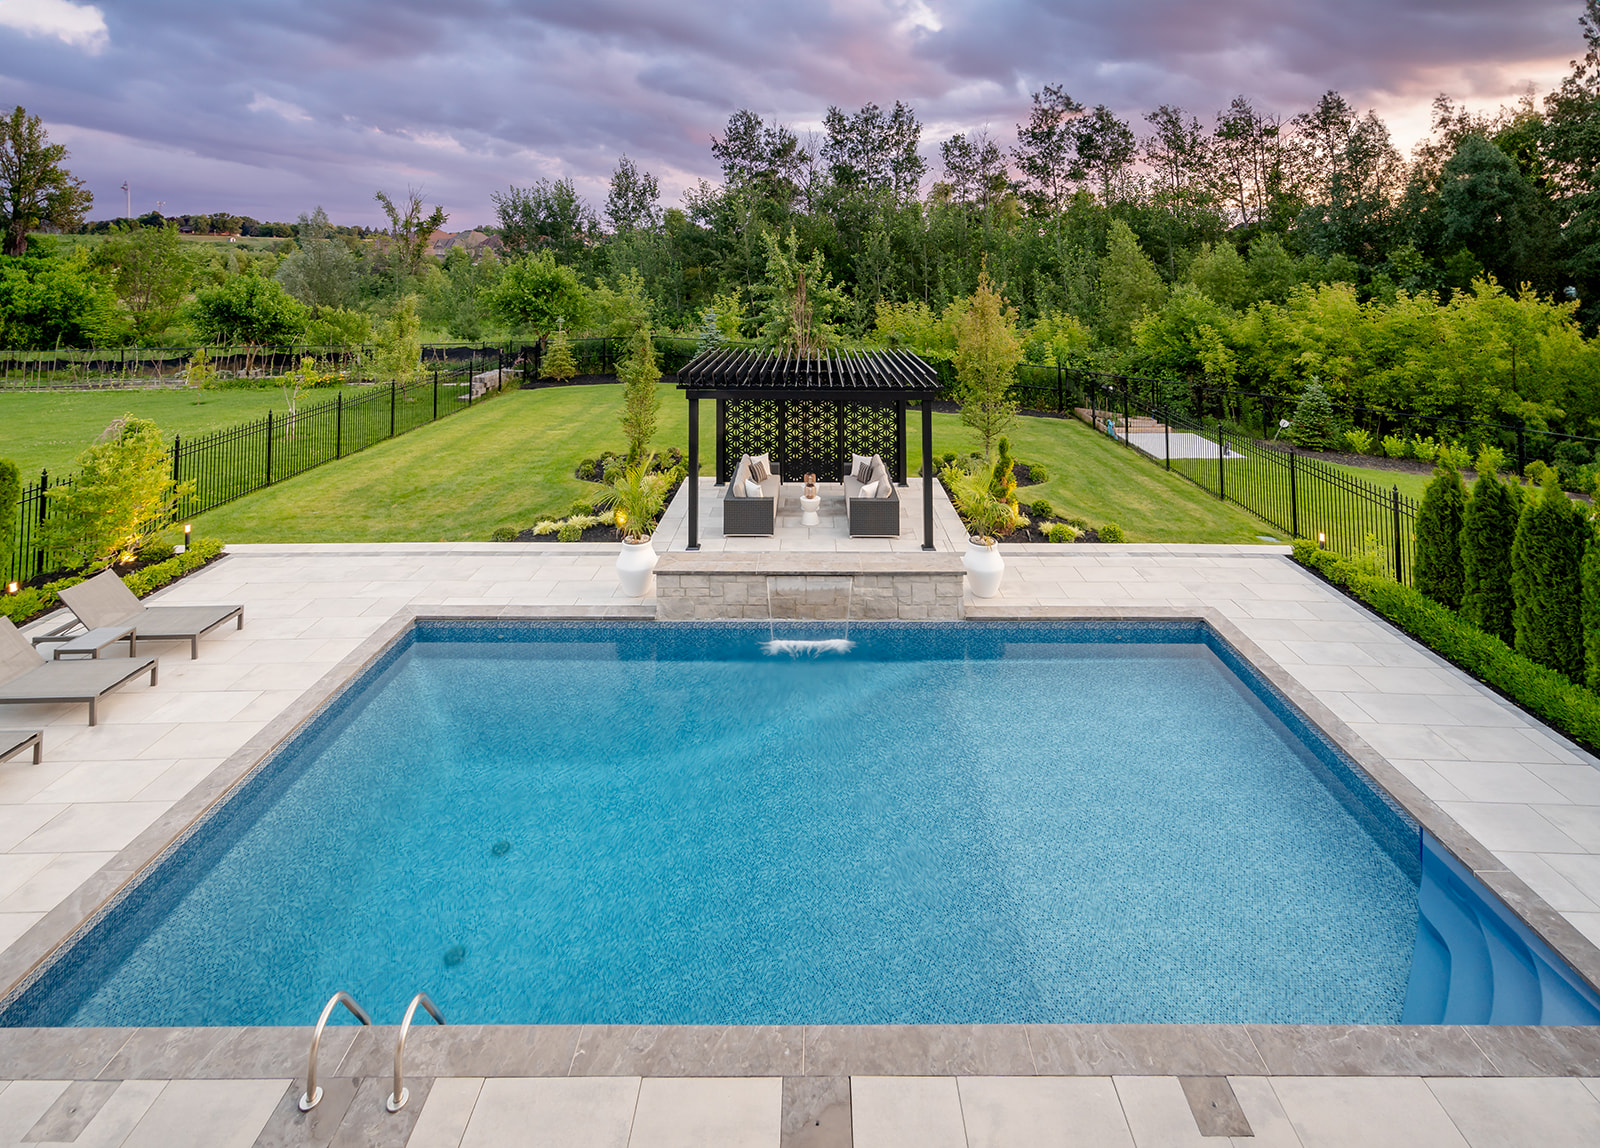 An inground pool with lounge chairs on the left and a metal gazebo near the back with the waterfall on.